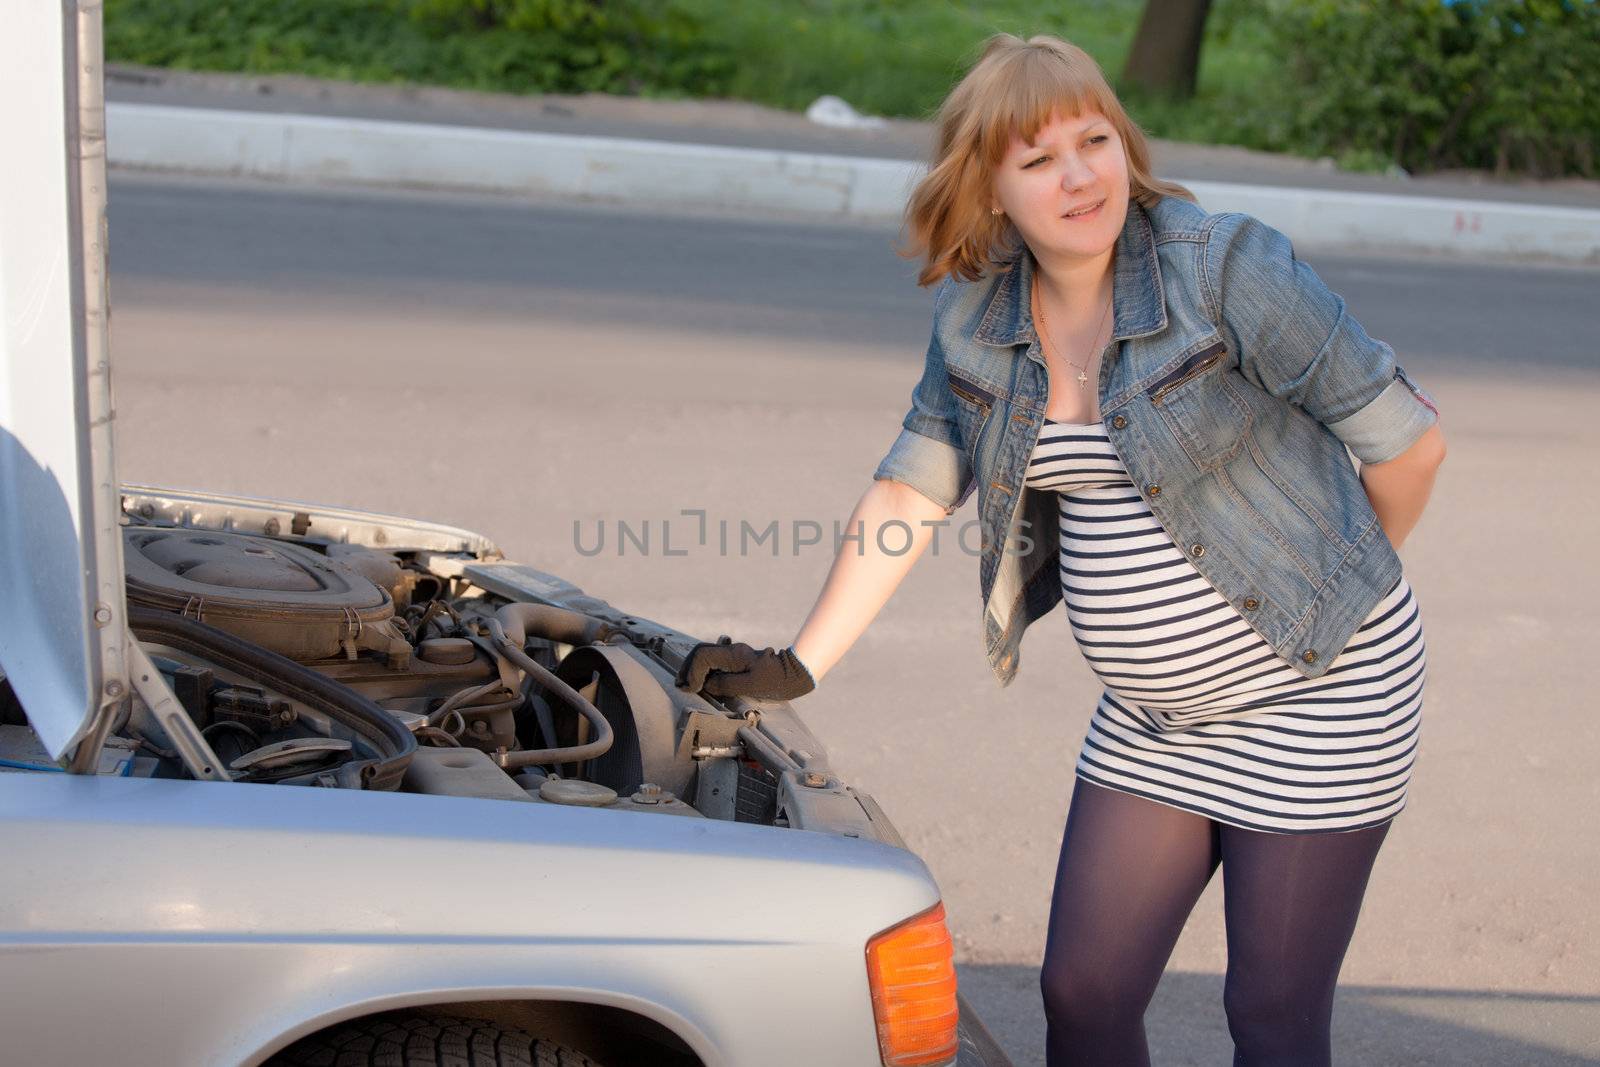 Pregnant Woman Trying to Repair the Car